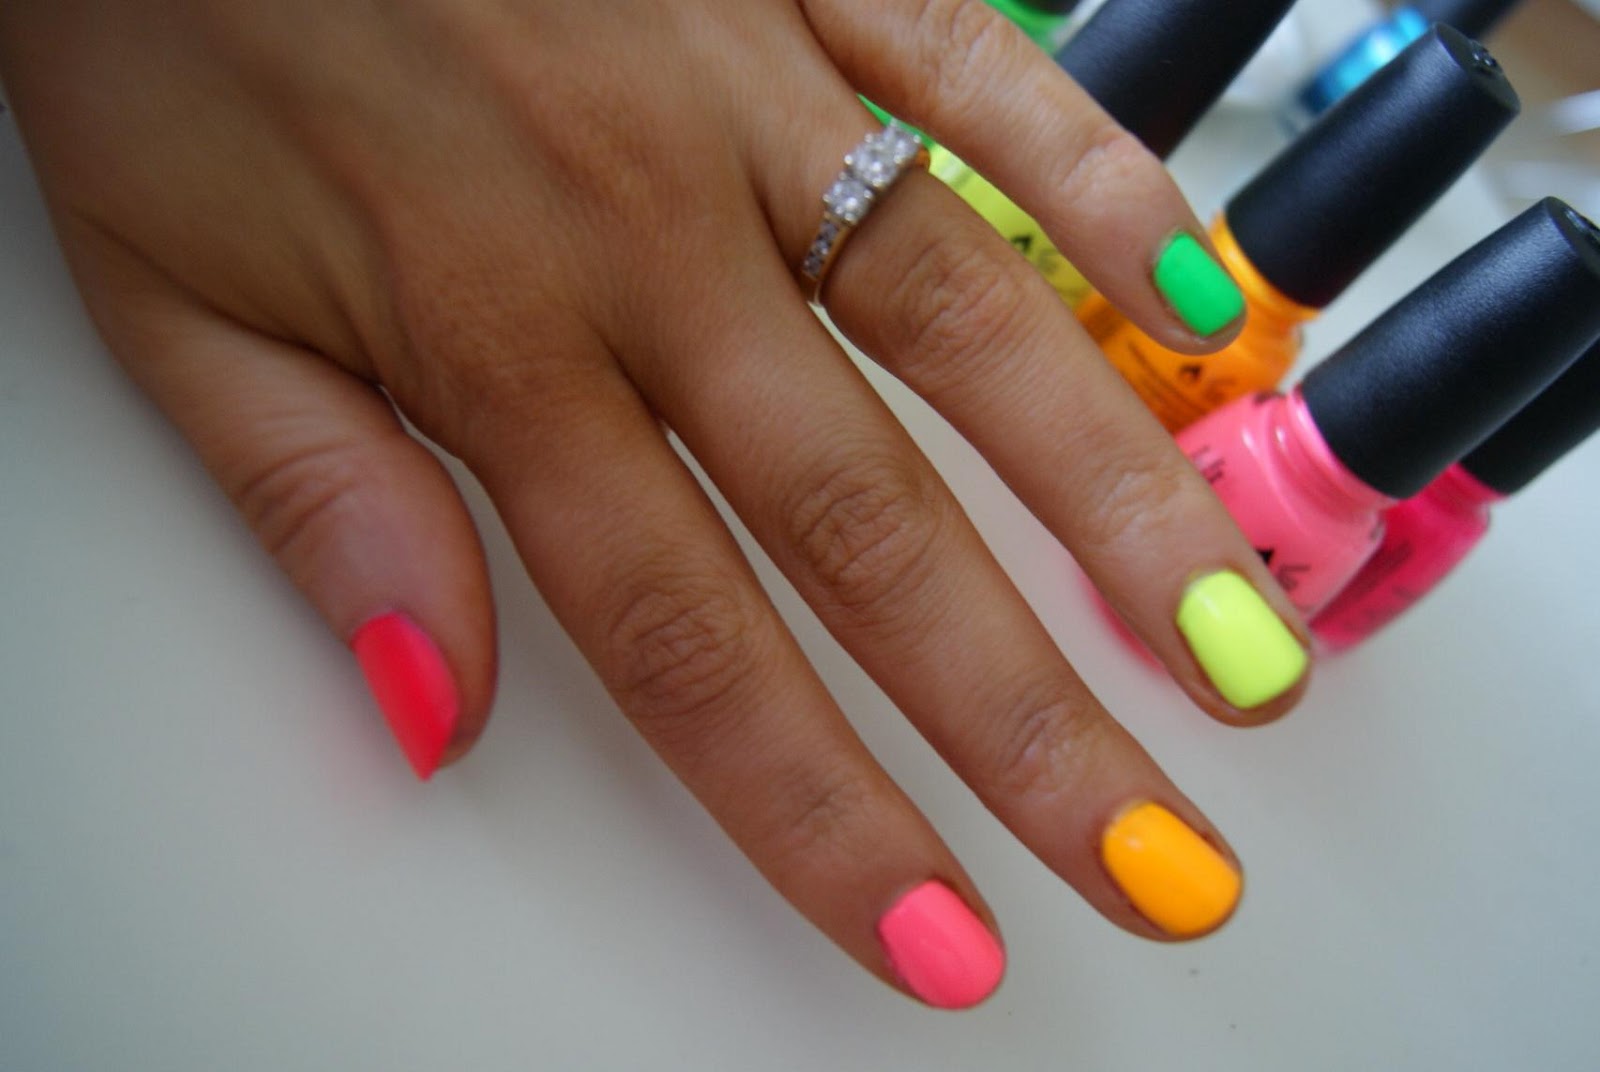 10. Neon nails - wide 8